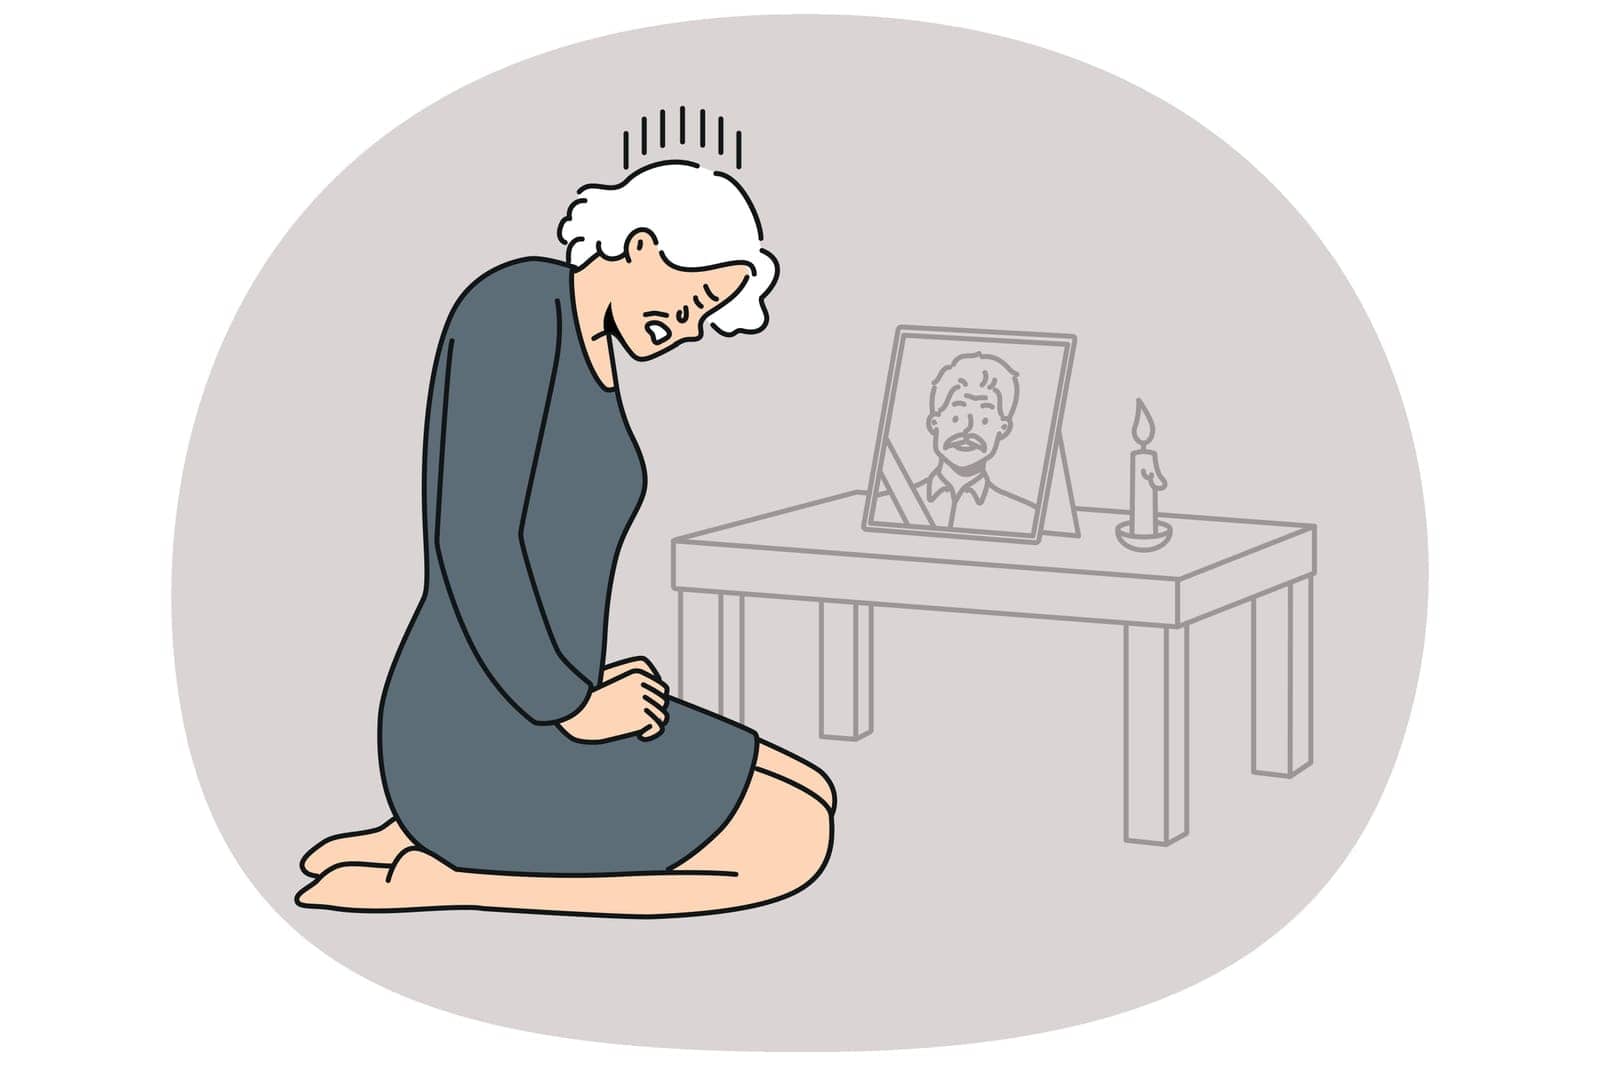 Desperate mature woman crying near husband portrait mourn after deceased spouse. Unhappy elderly grandmother grieve miss passed away grandfather. Vector illustration.